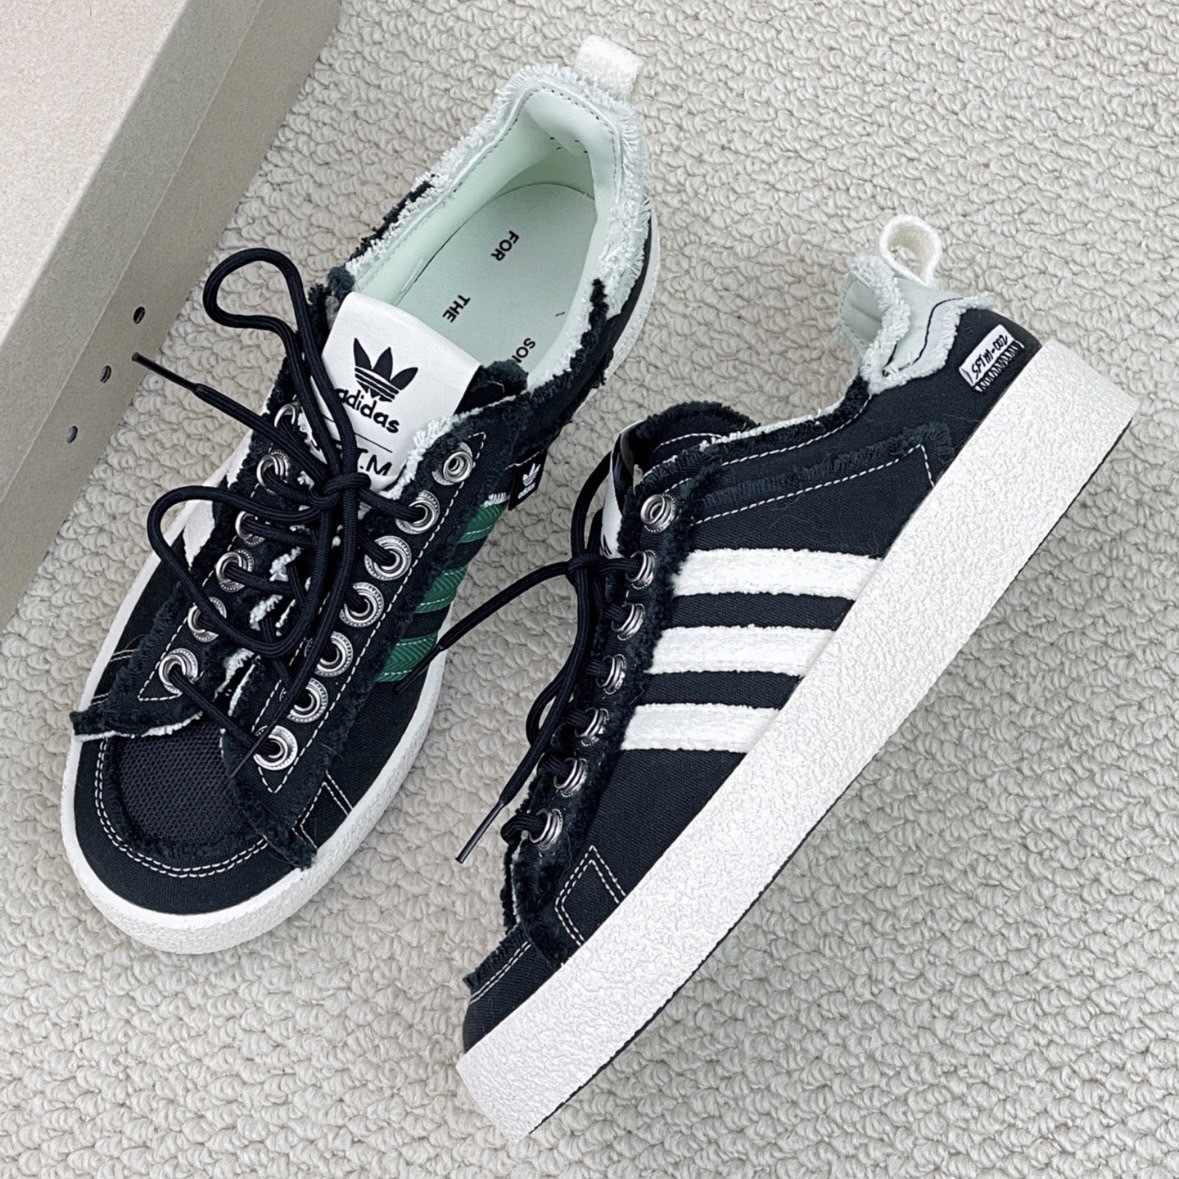 Adidas originals Campus 80S x SONG FOR THE MUTE x 002 '